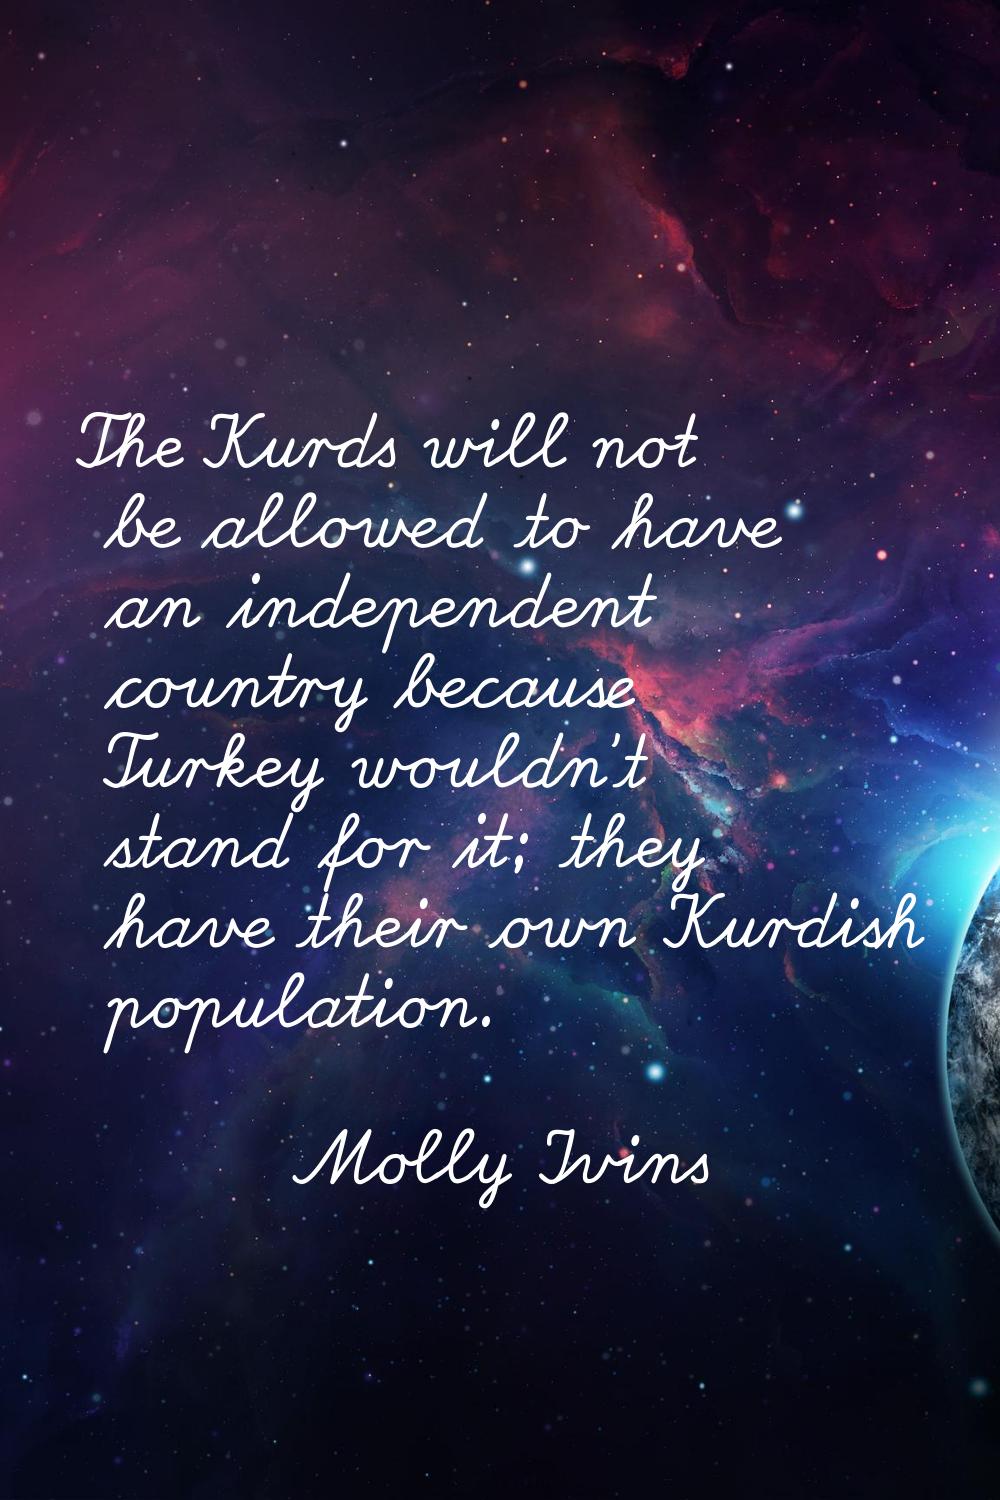 The Kurds will not be allowed to have an independent country because Turkey wouldn't stand for it; 